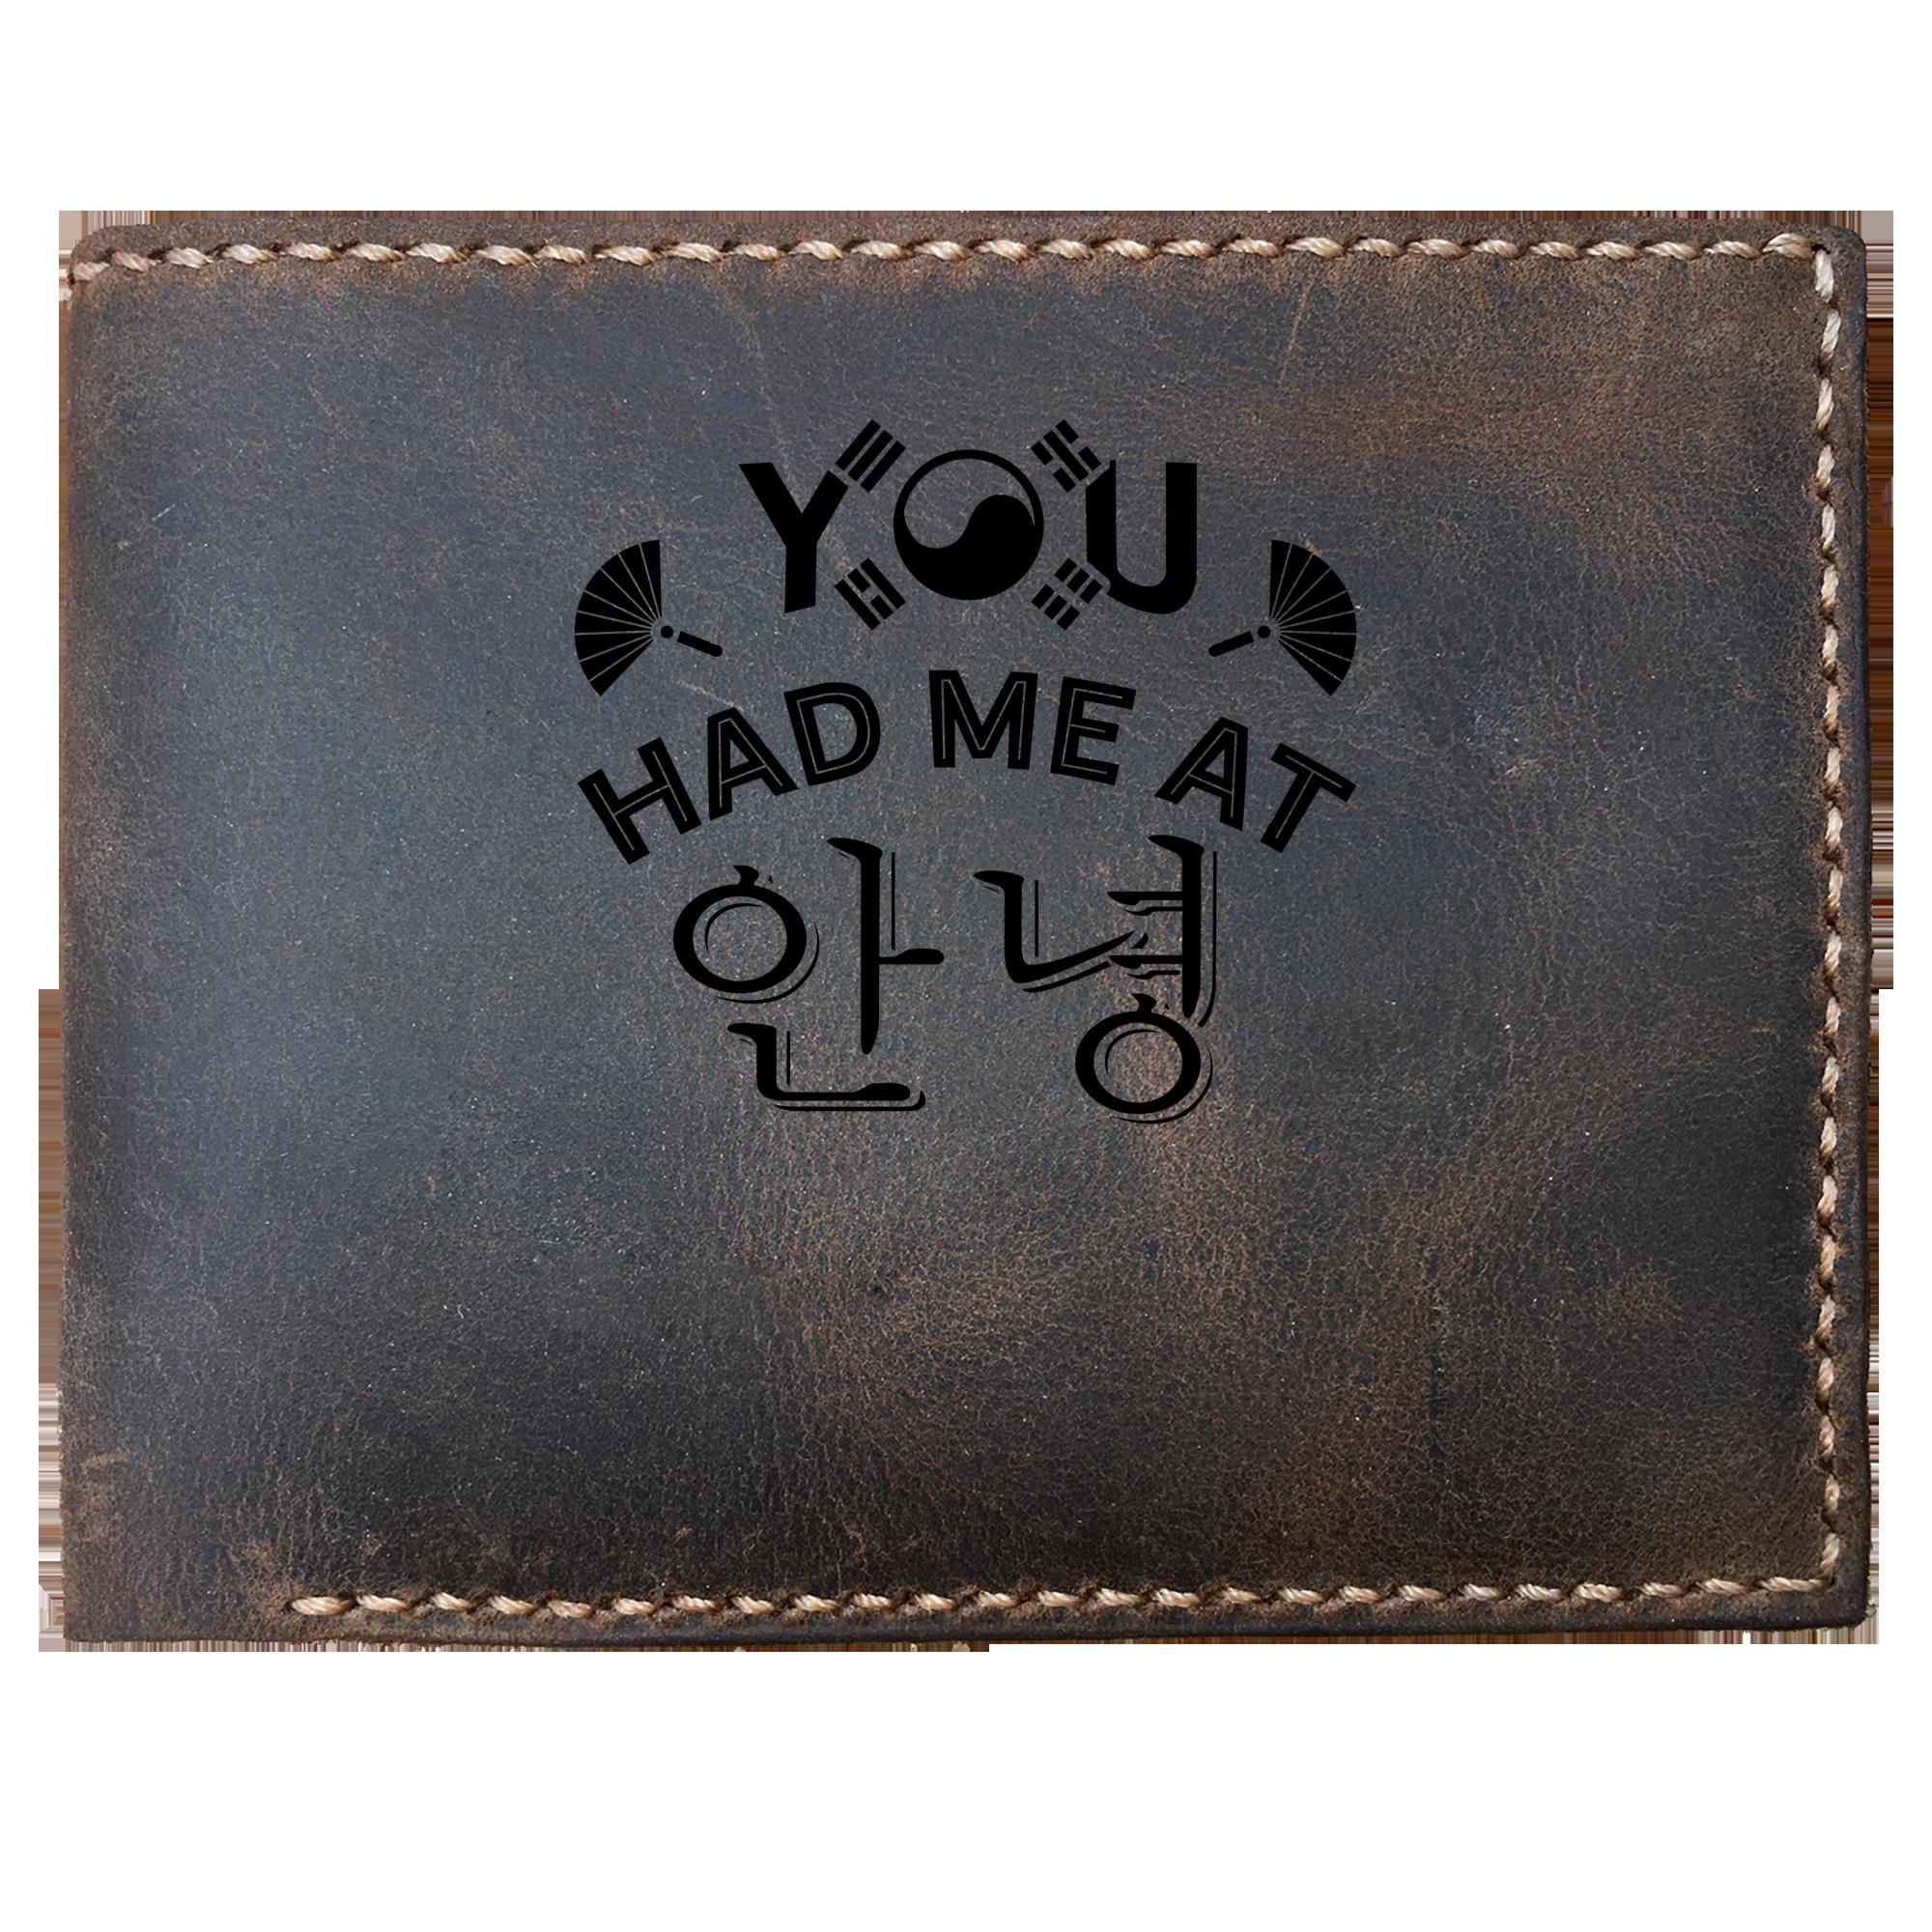 Skitongifts Funny Custom Laser Engraved Bifold Leather Wallet For Men, You Had Me At